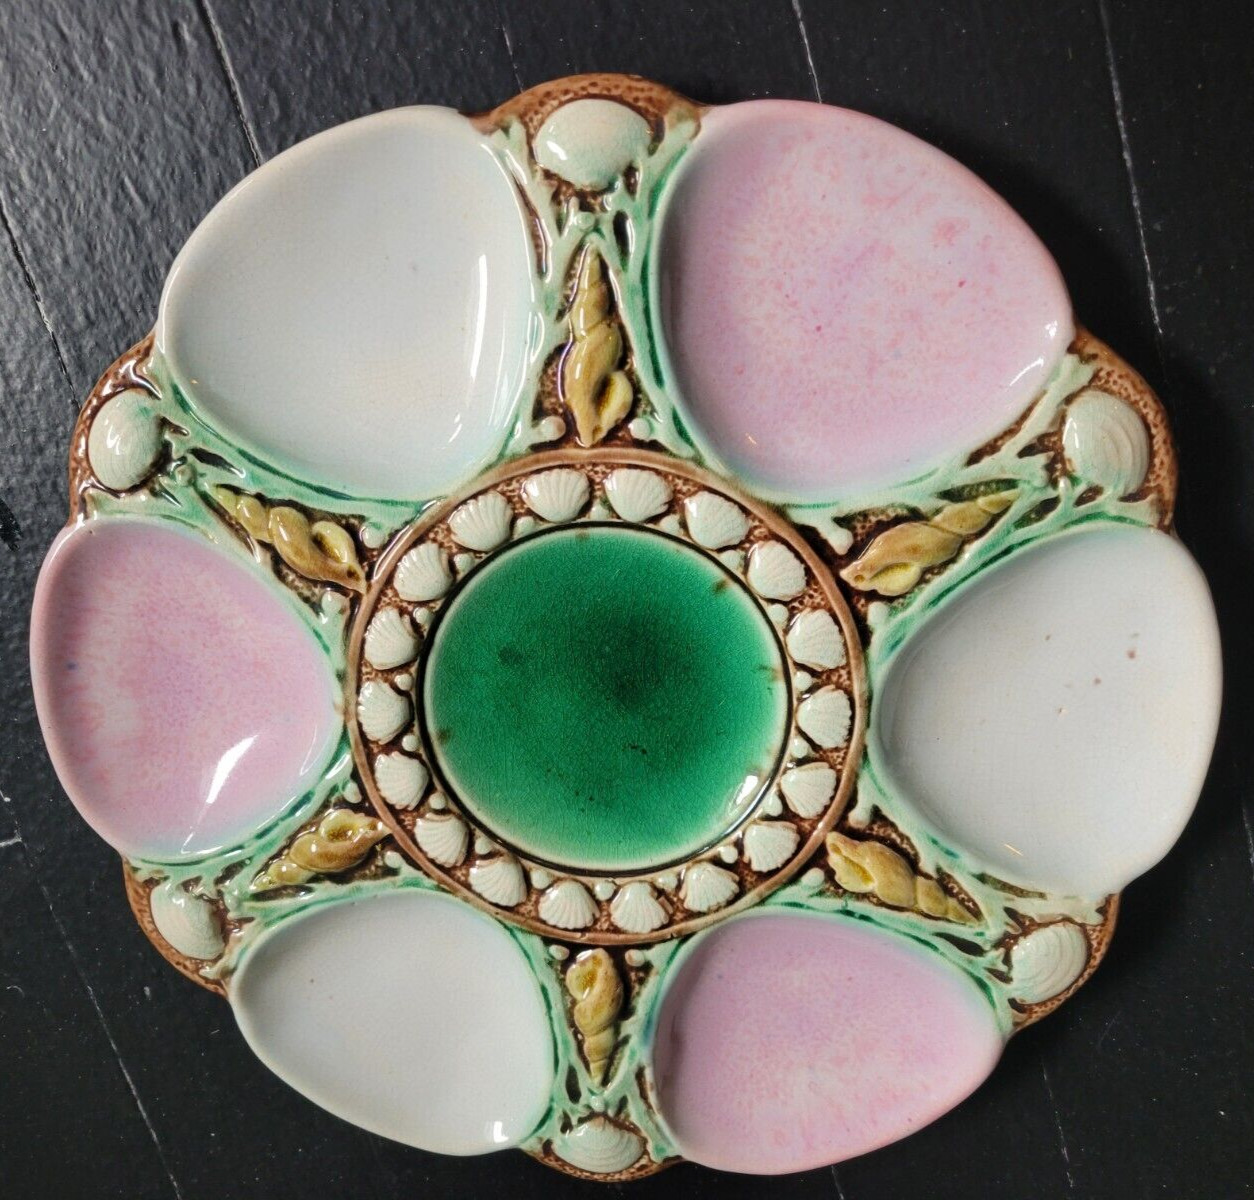 RARE VINTAGE FRENCH MAJOLICA MINTON HAND PAINTED 6 WELL OYSTER PLATE